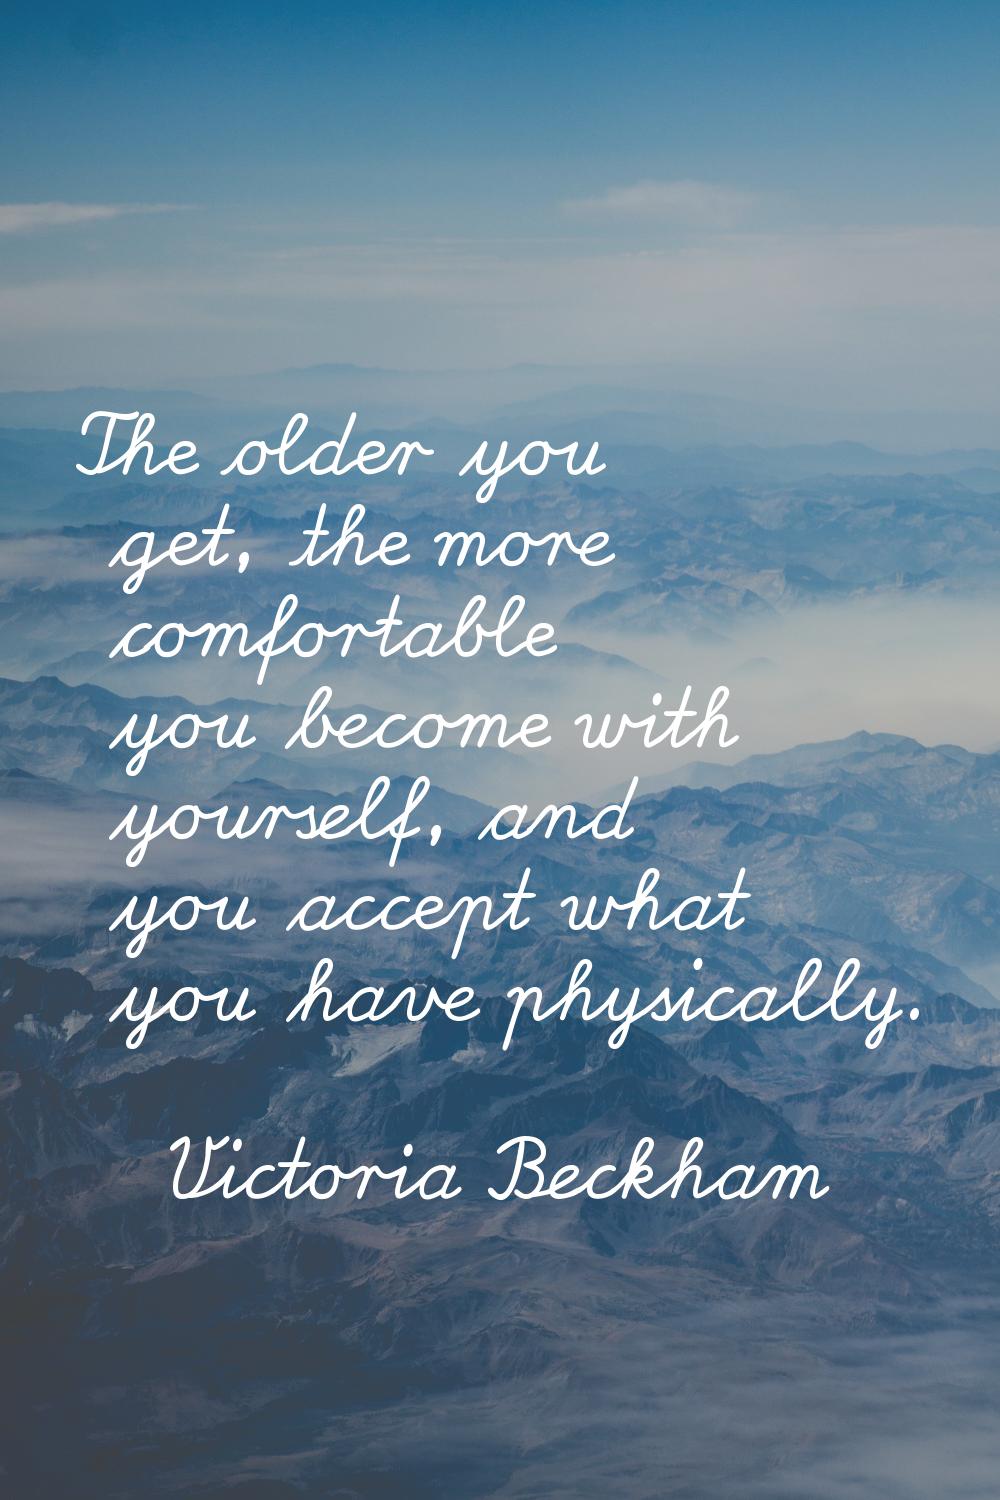 The older you get, the more comfortable you become with yourself, and you accept what you have phys